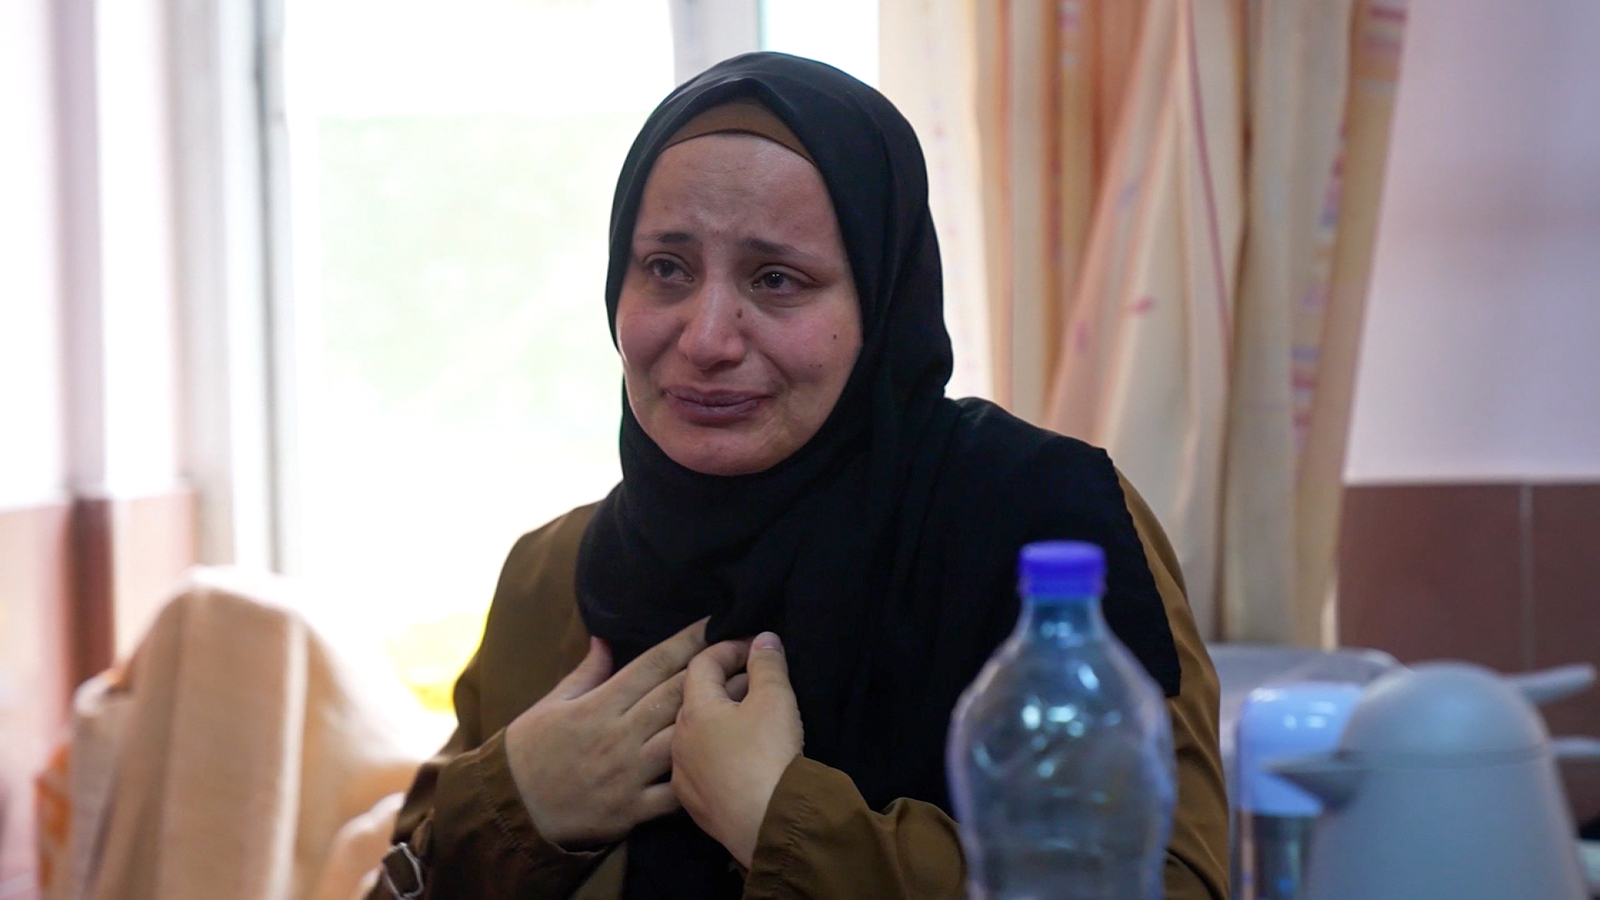 Nima Abu Garrara speaks to CNN in Jerusalem. She was brought from Rafah to East Jerusalem while pregnant with twins and gave birth on October 5.